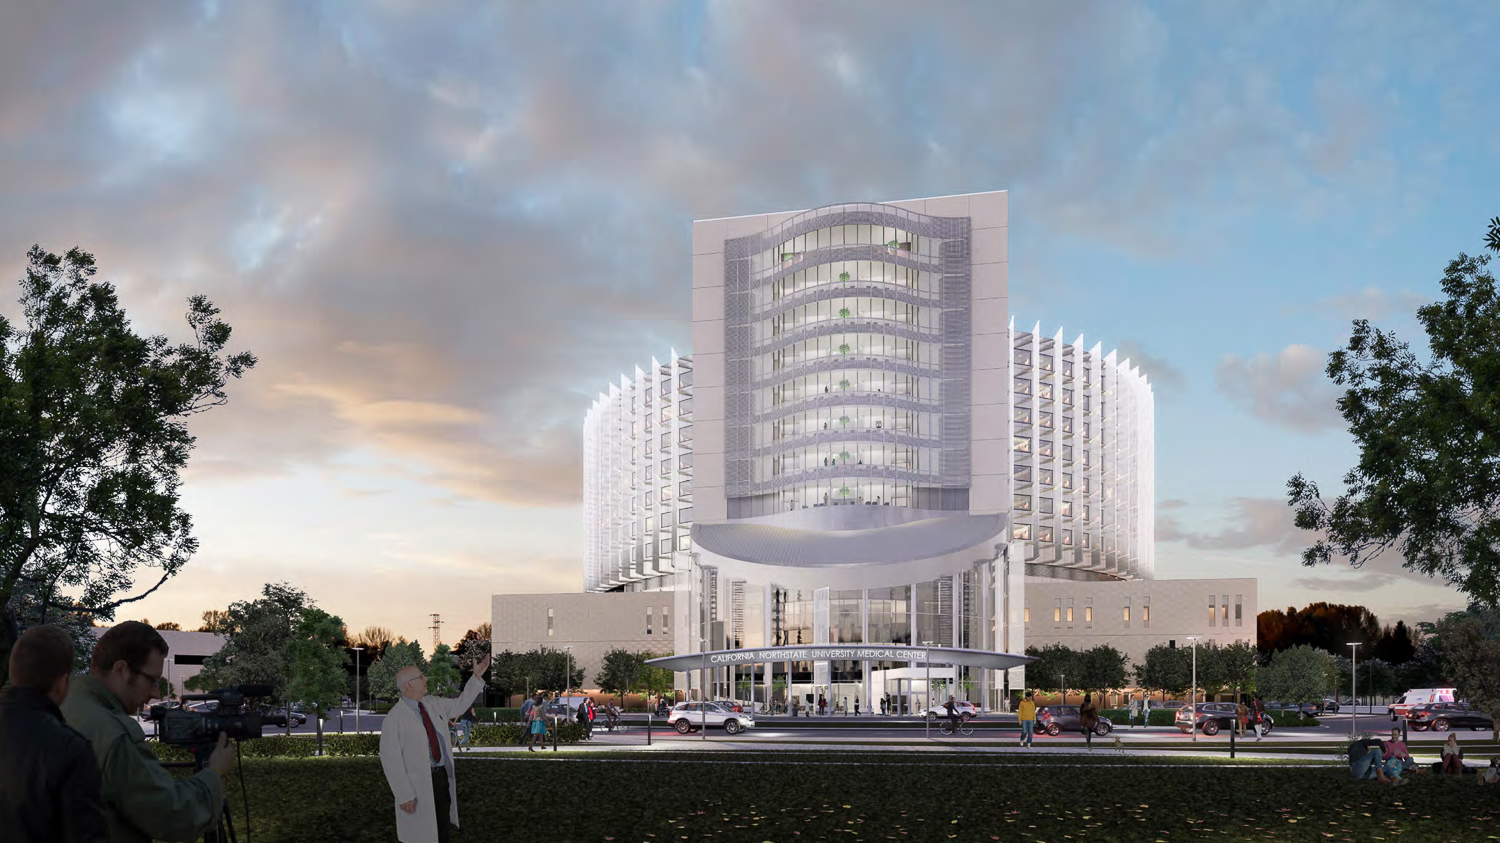 California Northstate University Medical Center view from the campus park, rendering by Fong & Chan Architects